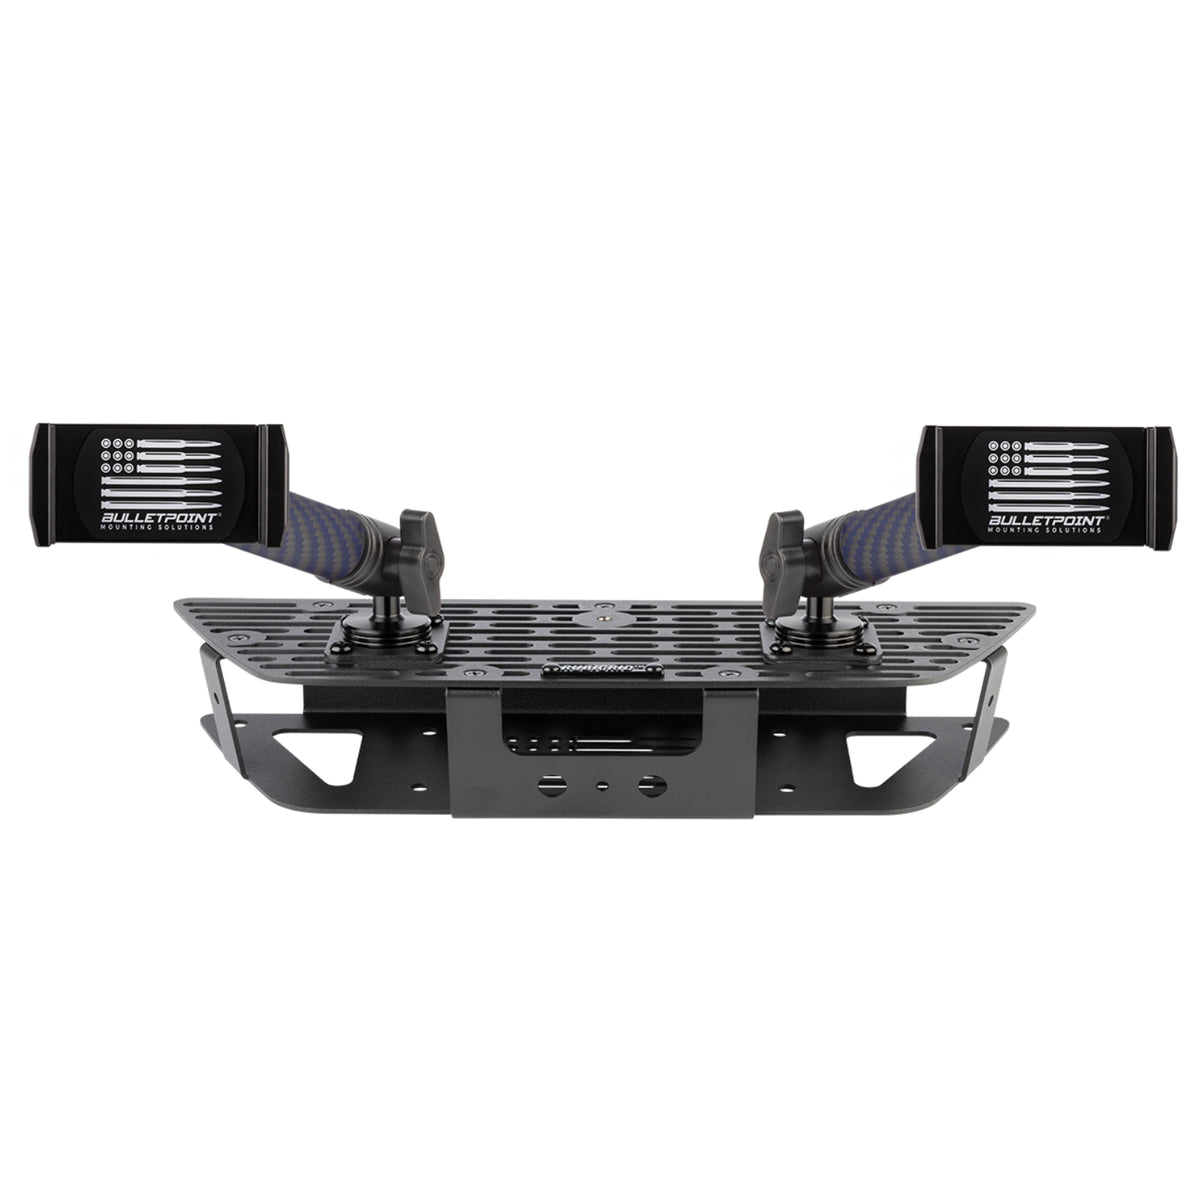 Bulletpoint Mounting Solutions for Jeep, RAM, Ford, Chevy, GMC, Toyota